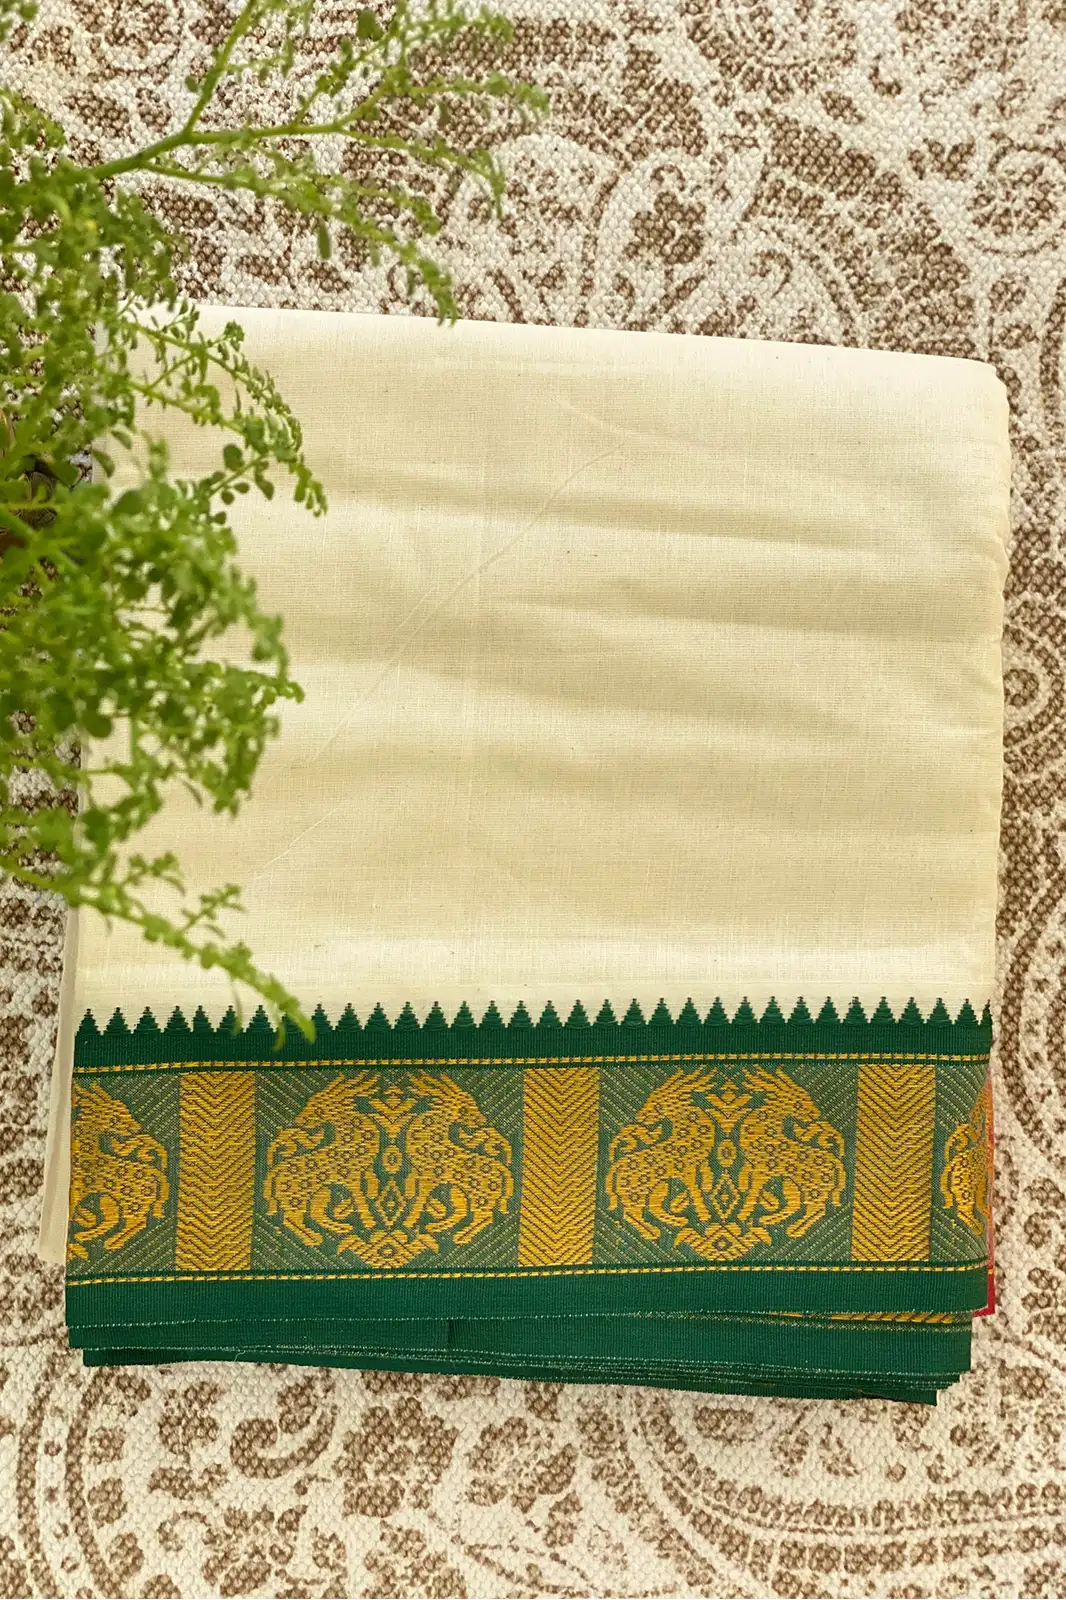 sodot natural cotton dhoti, indian traditional clothes shop, sustainable clothing brand, organic cotton dhoti, mens cotton dhotis, mens handwoven cotton dhotis, white cotton dhoti online, handwoven dhoti, dhoti wrap, dhoti clothing, cotton dhoti pants, handwoven cotton, cotton dhoti online, cotton dhoti price, handloom cotton dhoti, cotton silk dhoti, best cotton dhoti, cotton print dhoti, handloom cotton dhoti kurta, mangalagiri cotton dhoti, south indian cotton dhoti online, cotton dhoti dress, cotton dhoti kurta, printed dhoti pants, printed dhoti kurta, printed dhoti men's, printed dhoti style dress, Indian traditional clothes, indian traditional clothes shop, sustainable clothing brand, handwoven men clothing